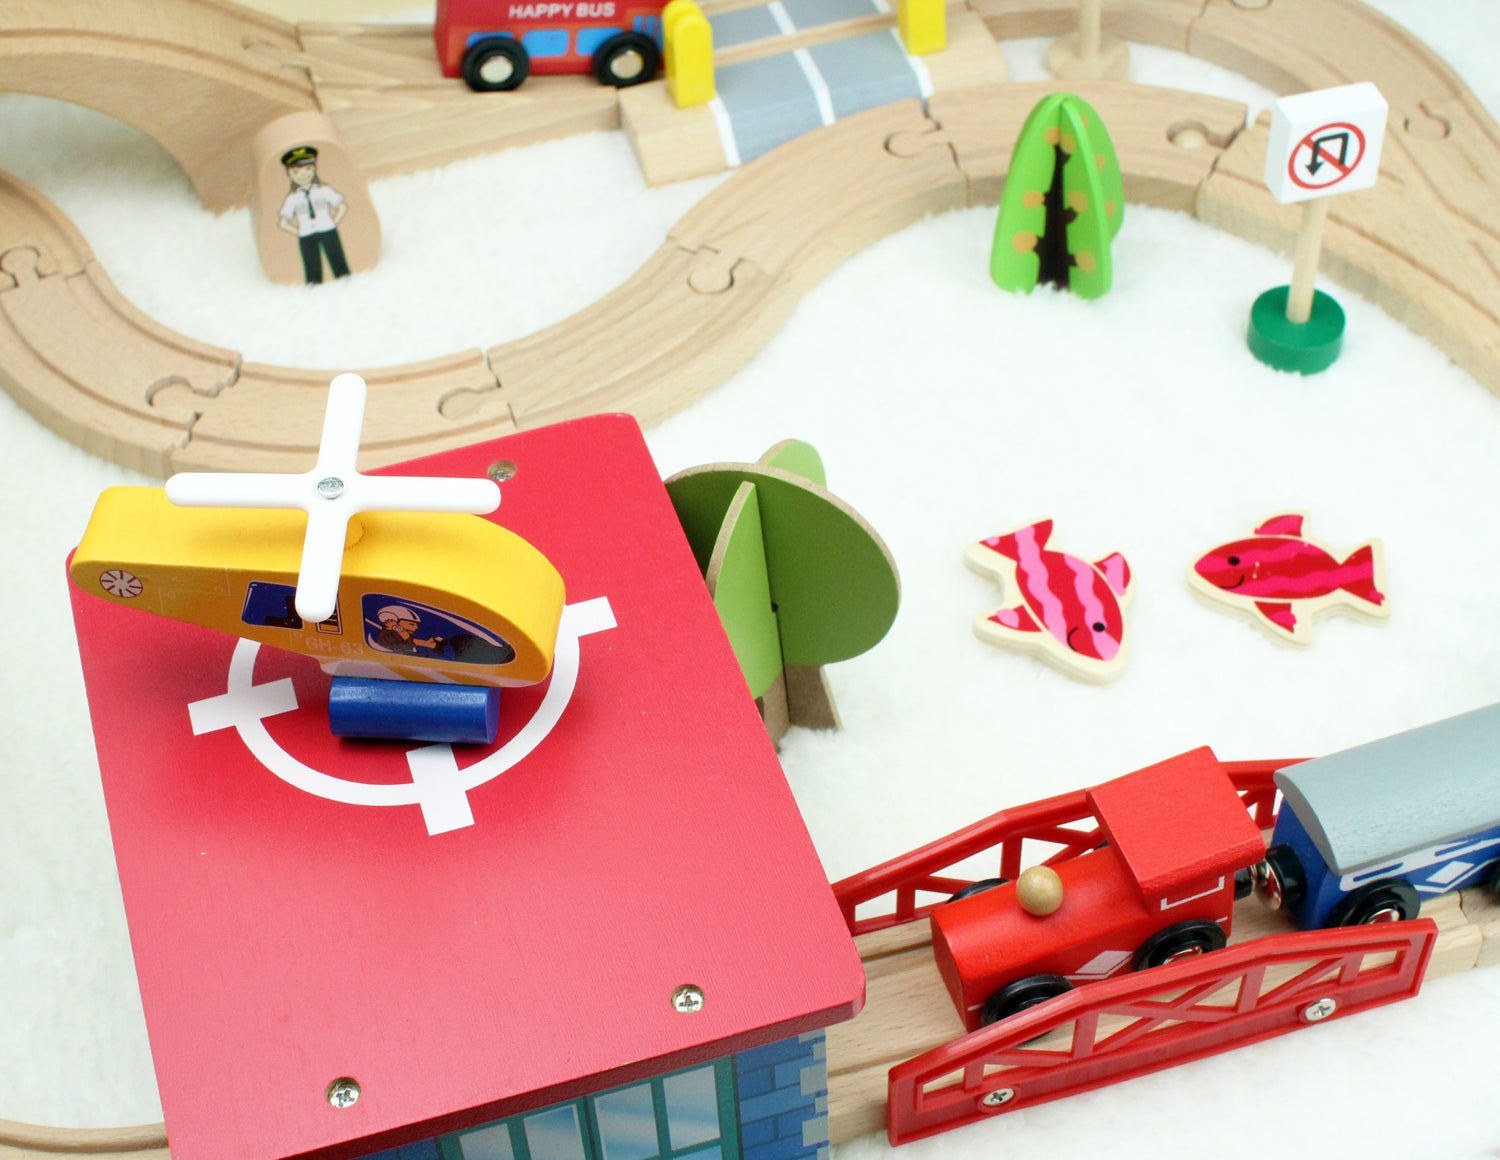 wooden train (station) toy set with bus, helicopter, trees, fishing, traffic lights